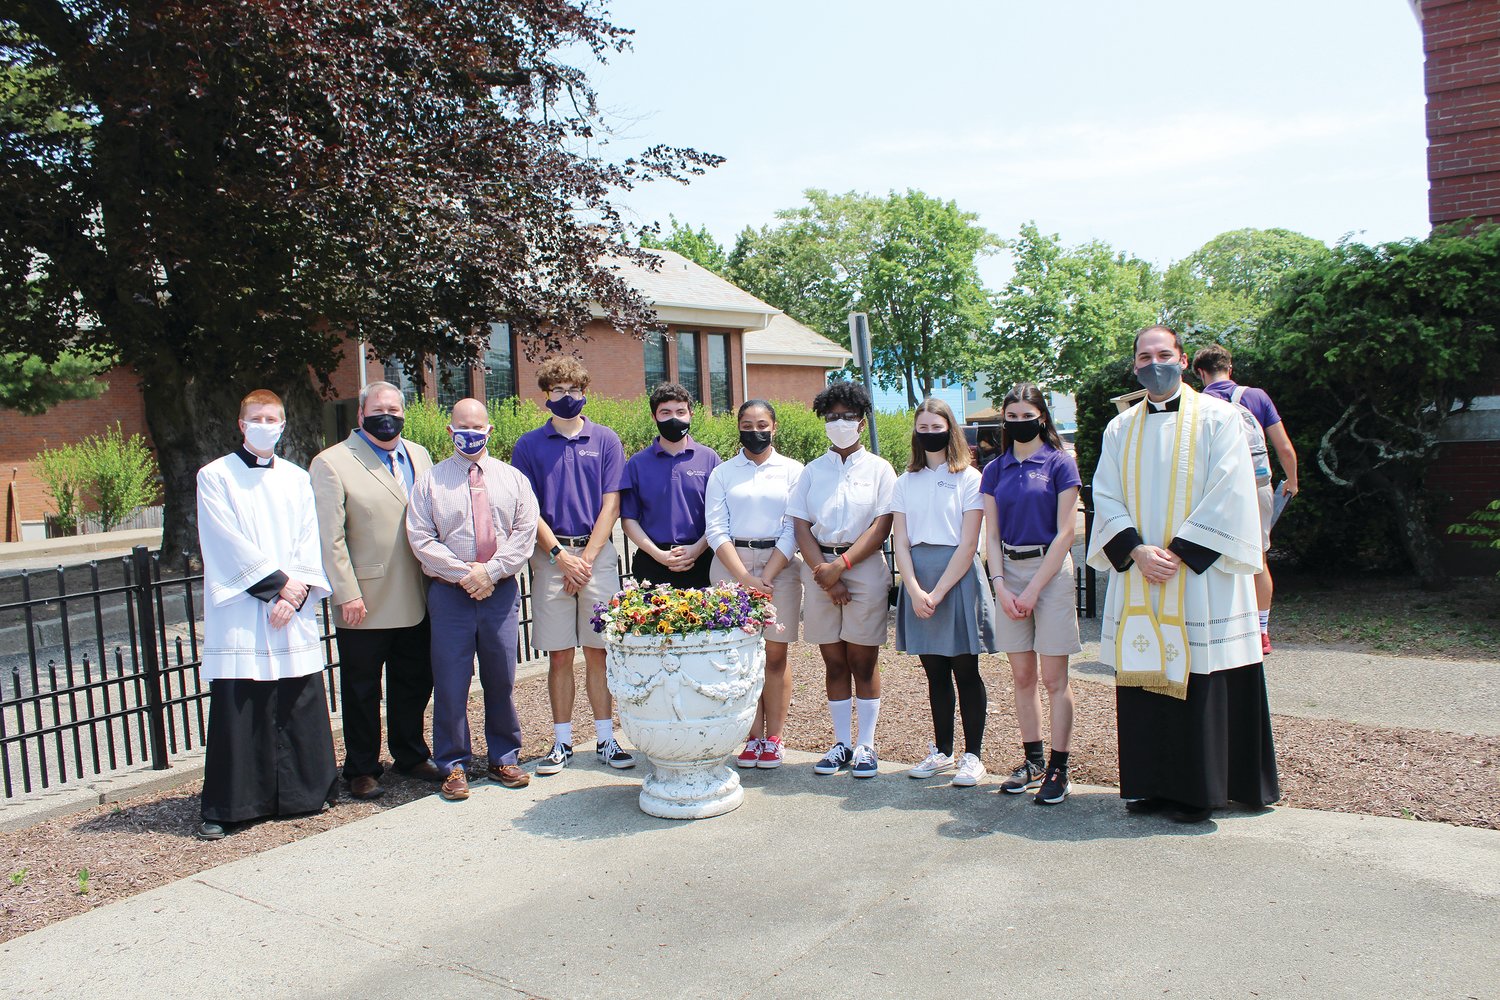 Pictured are seminarian Jay Zizzo, Steve Vargas, Vice Principal of Student Life Marc Thibault, students Josh Farrell, David Wilson, Natalya Cabral, Ralphletha Flowers, Clare Bradley, Isabel Sullivan and Academy Chaplain Father Ryan Simas.